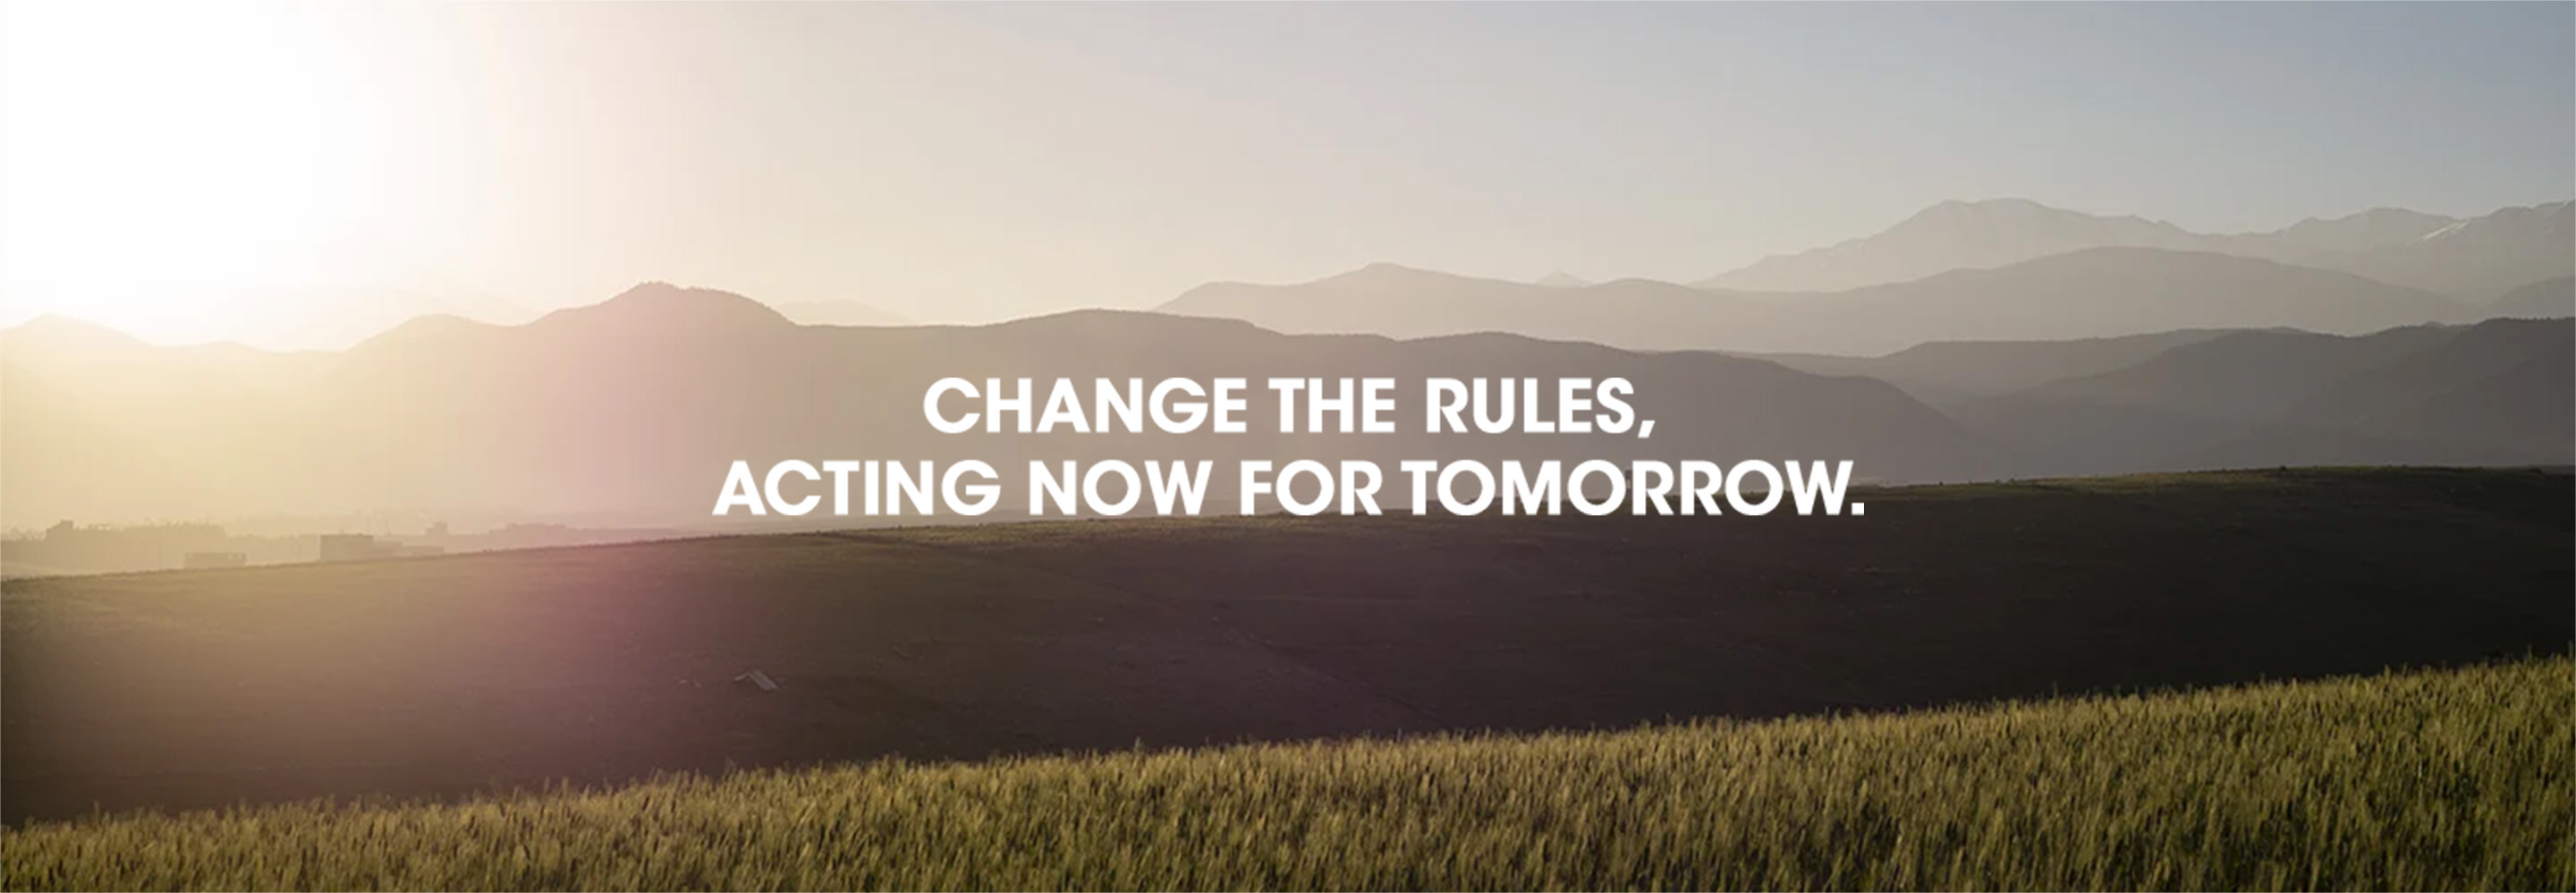 CHANGE THE RULES, ACTING NOW FOR TOMORROW.